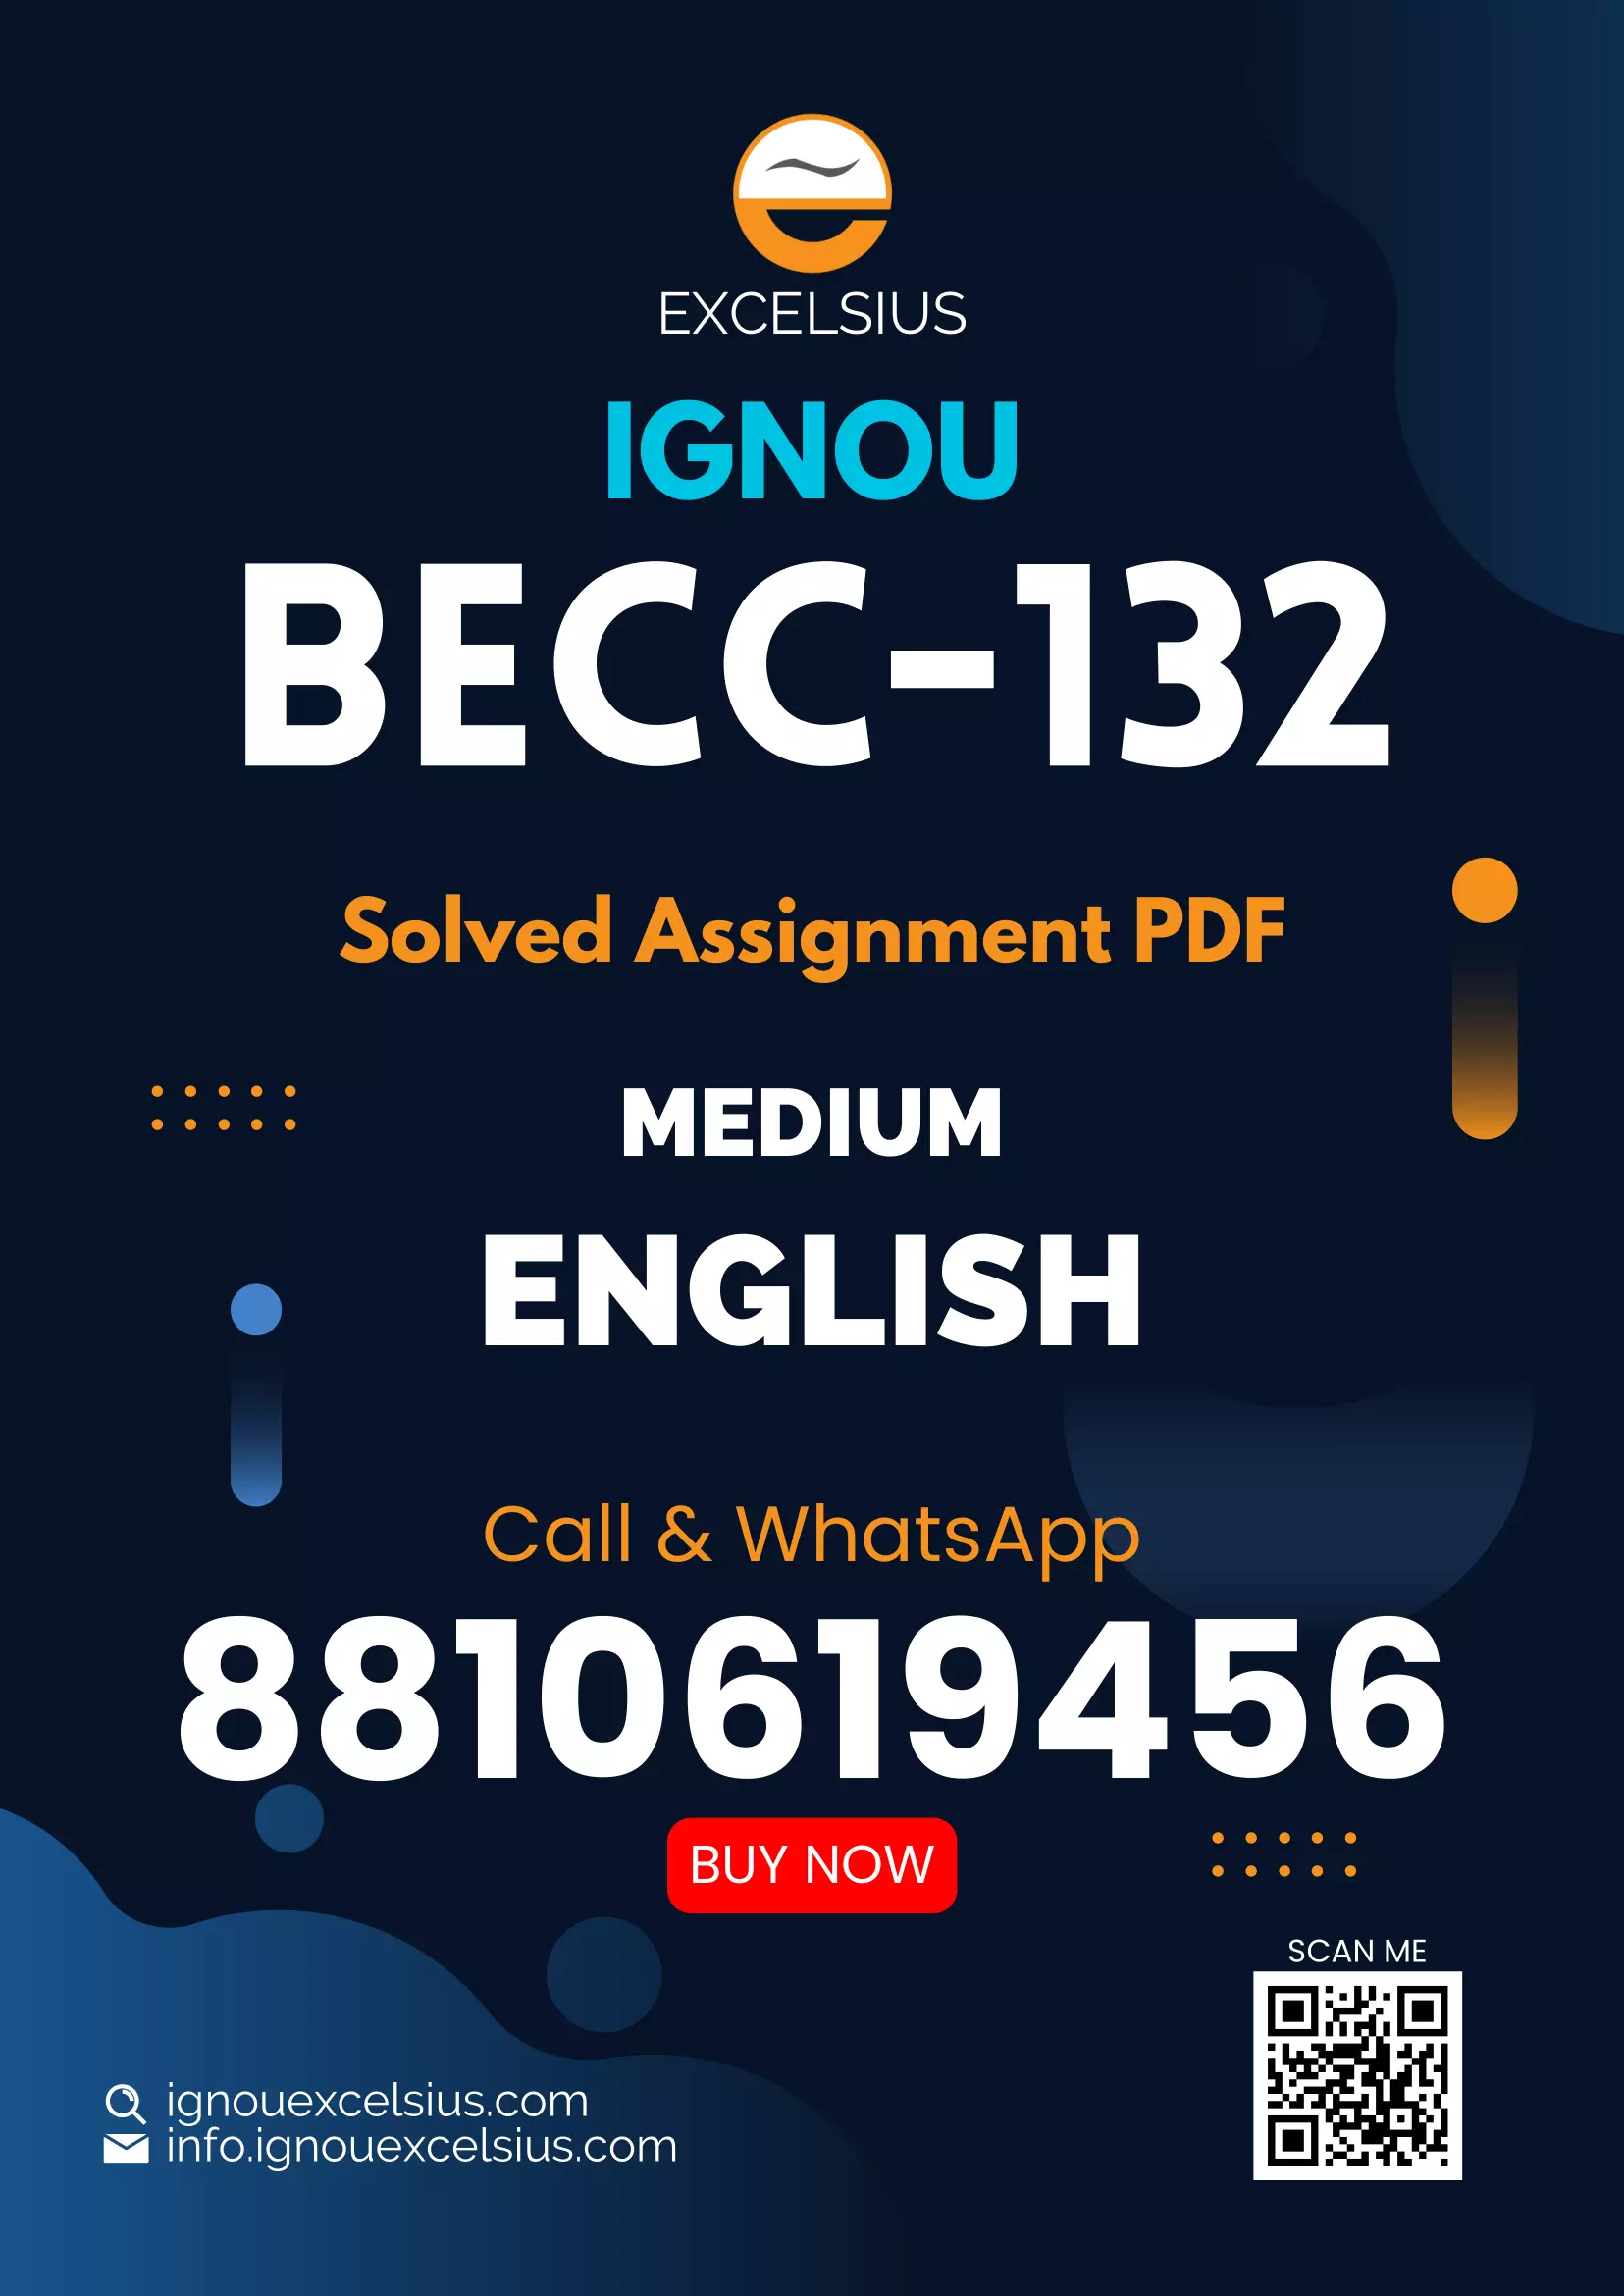 IGNOU BECC-132 - Principles of Microeconomics-II, Latest Solved Assignment-July 2022 – January 2023